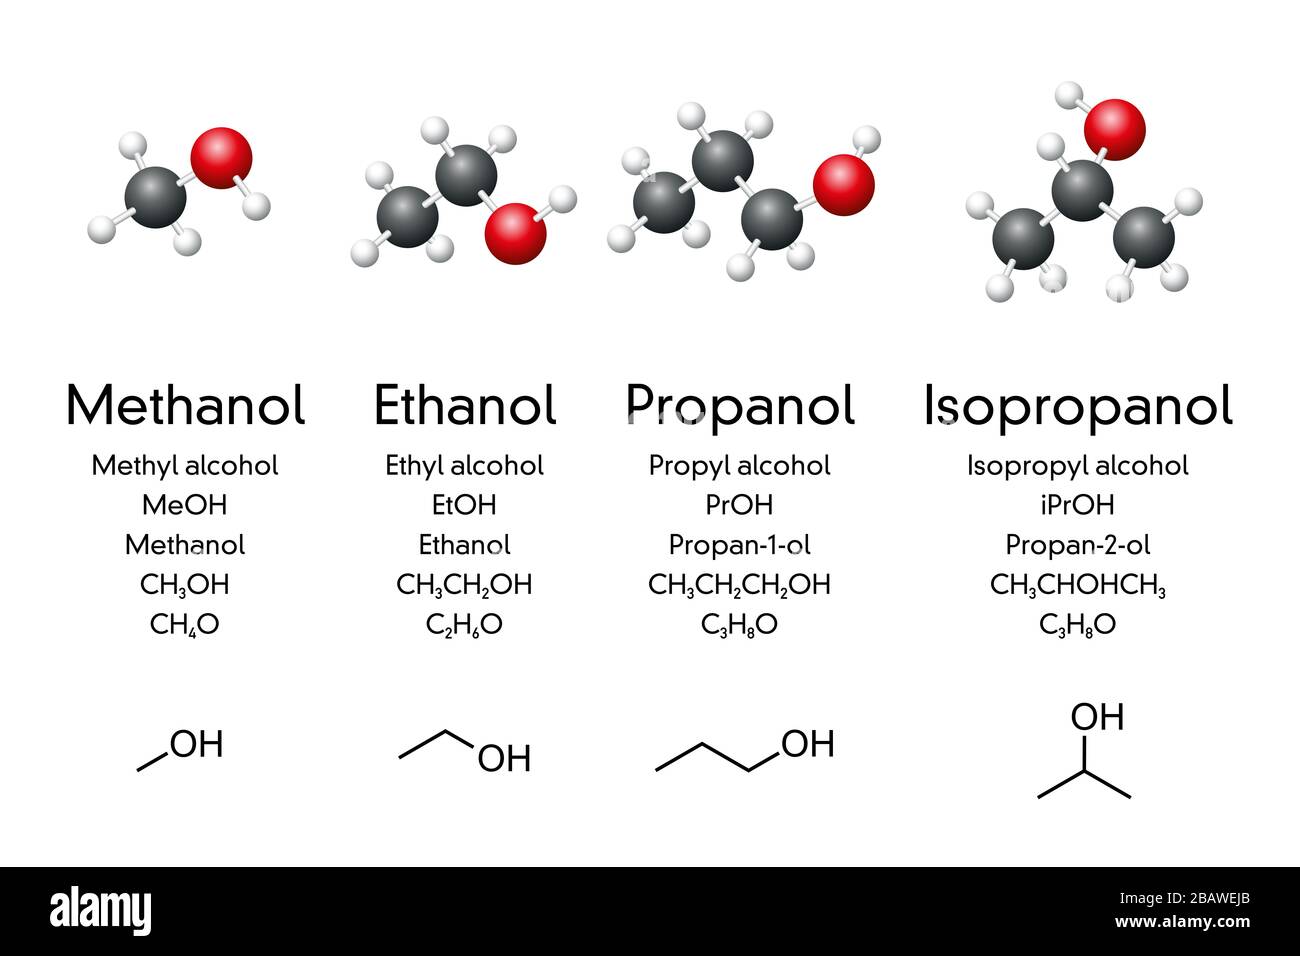 Simple alcoholic compounds, molecular models, chemical and skeletal formulas. Methanol, ethanol, propanol, isopropanol. Fuel, antiseptic, disinfectant Stock Photo